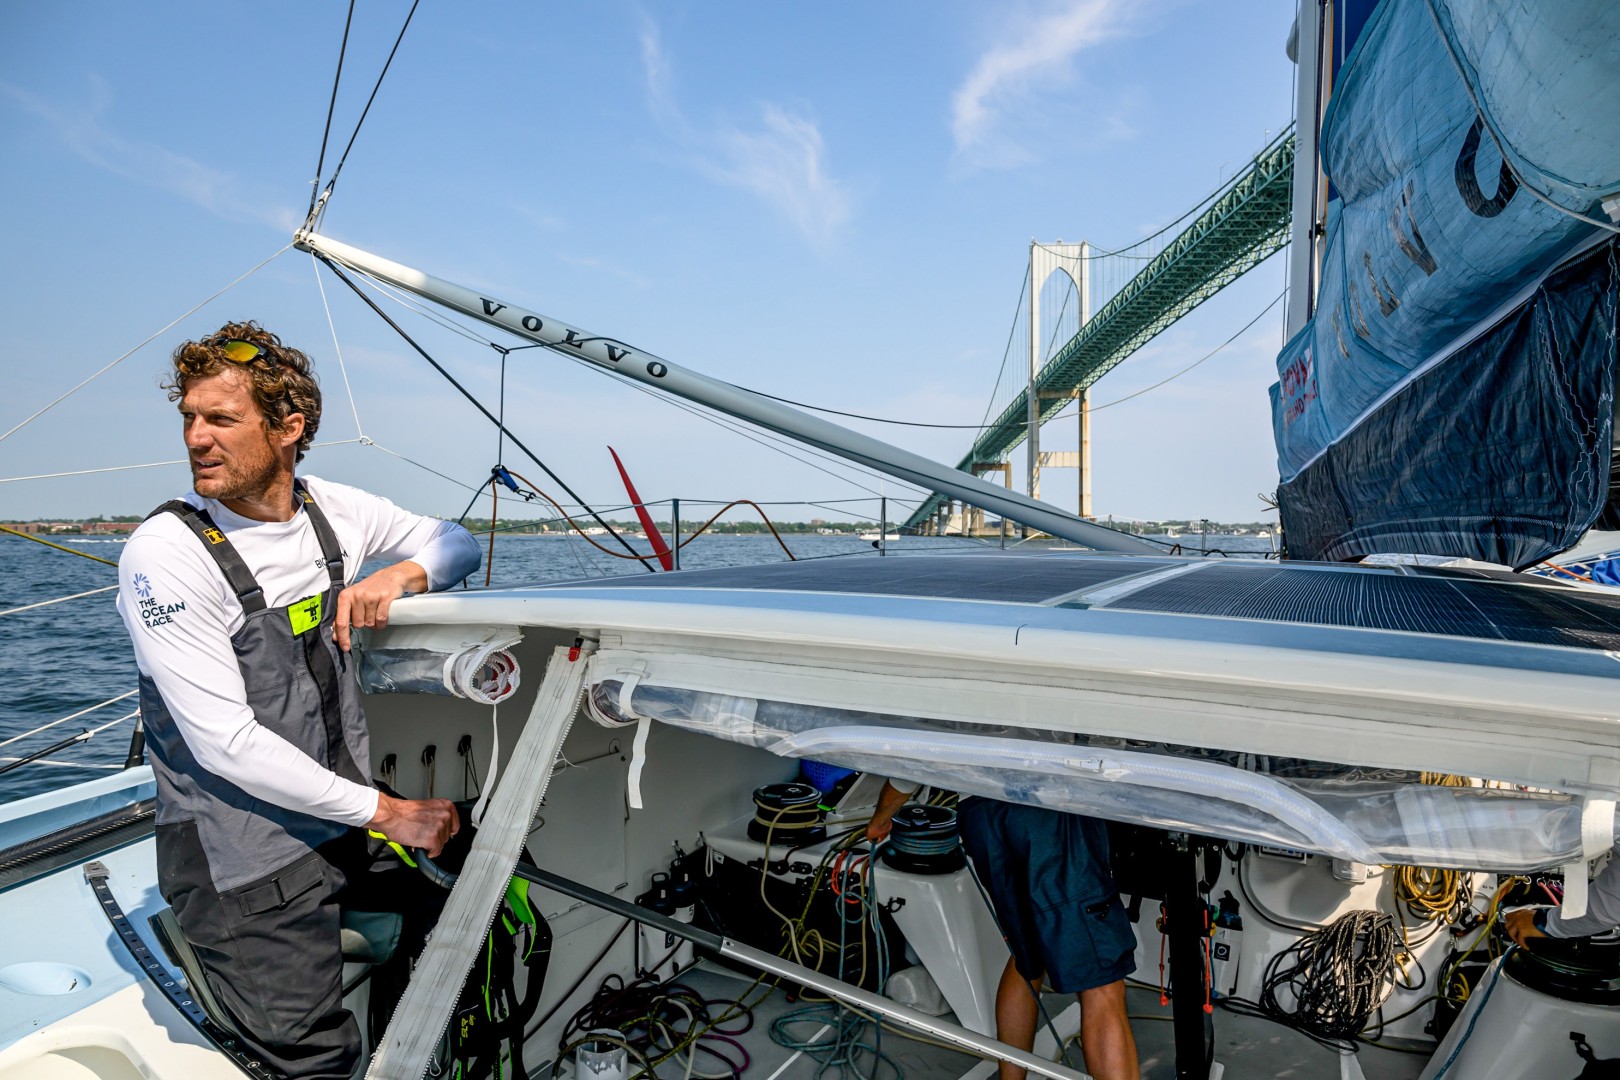 The Ocean Race 2022-23 - 21 May 2023, Leg 5, Day 1 onboard Biotherm. Skipper Paul Meilhat checking the fleet to make a decision during Newport In-Port Race.
© Anne Beauge / Biotherm / The Ocean Race